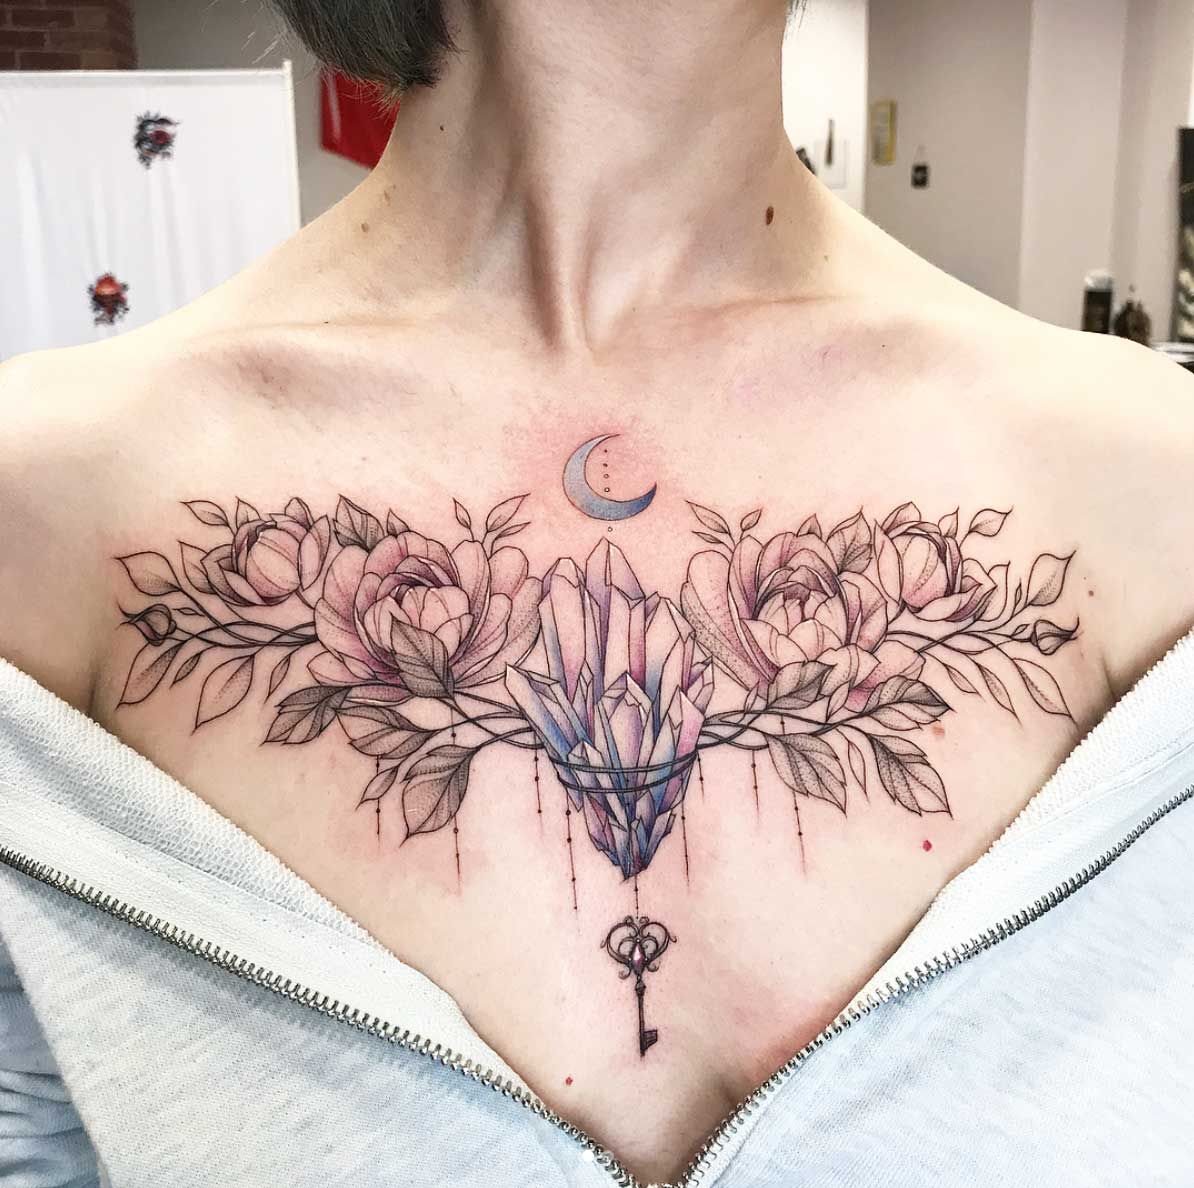 Female Chest Tattoo Pictures Ideas (106)